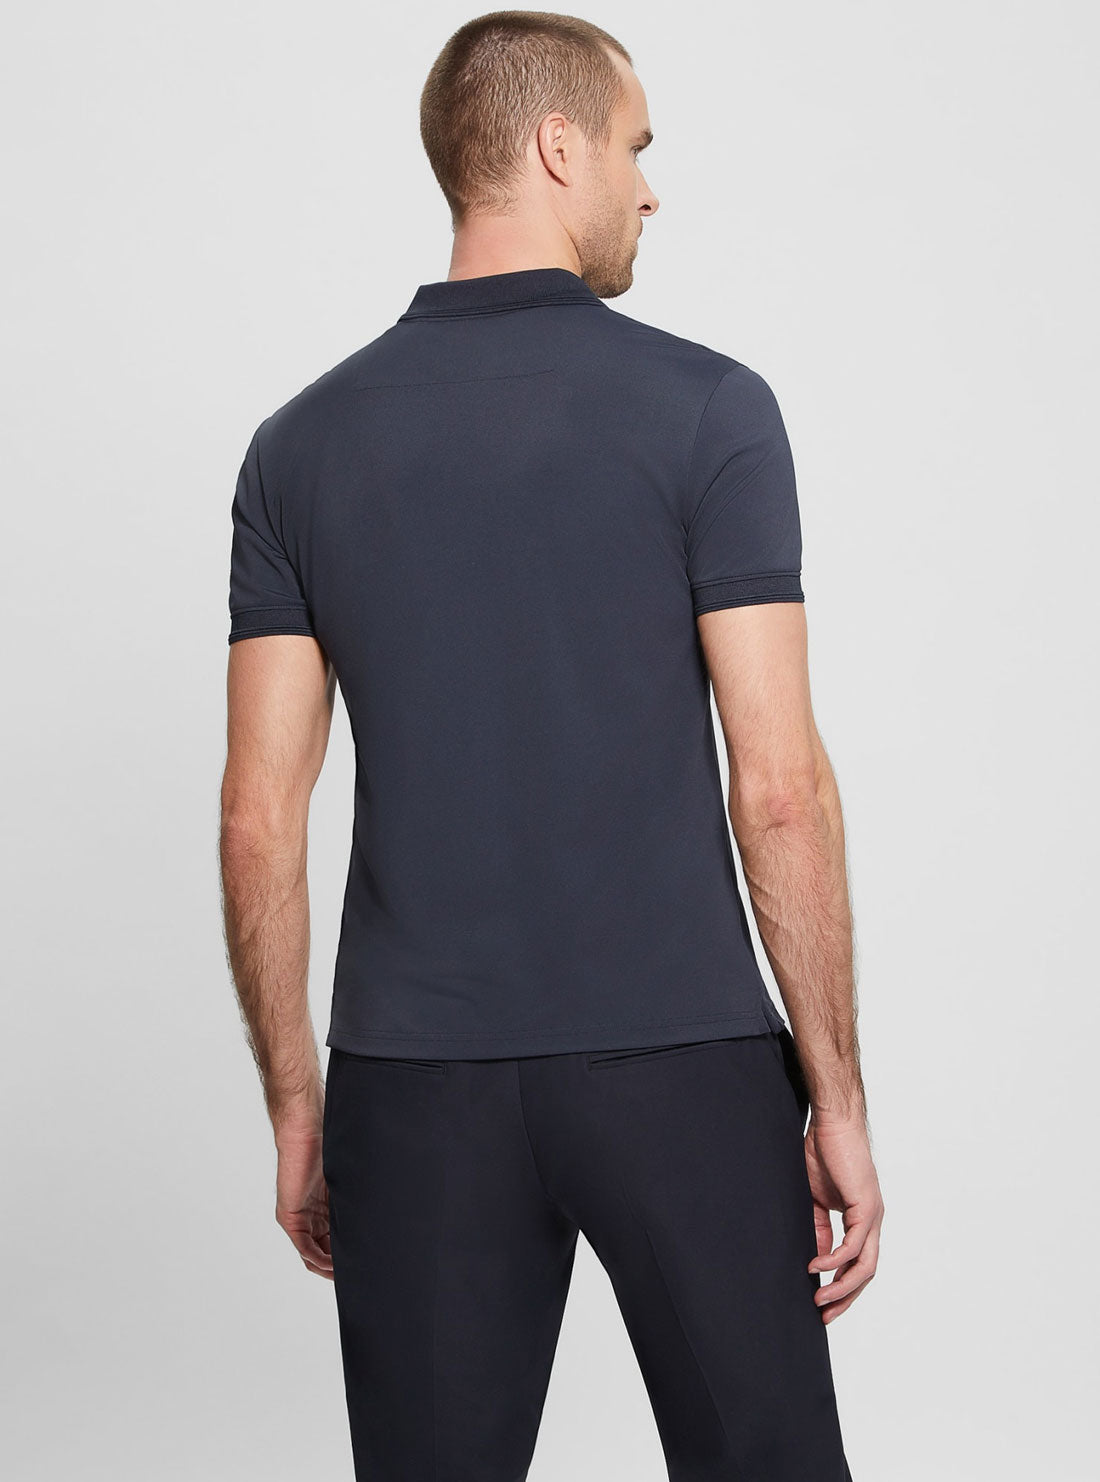 Navy Blue Stretch Polo T-Shirt | GUESS men's apparel | back view